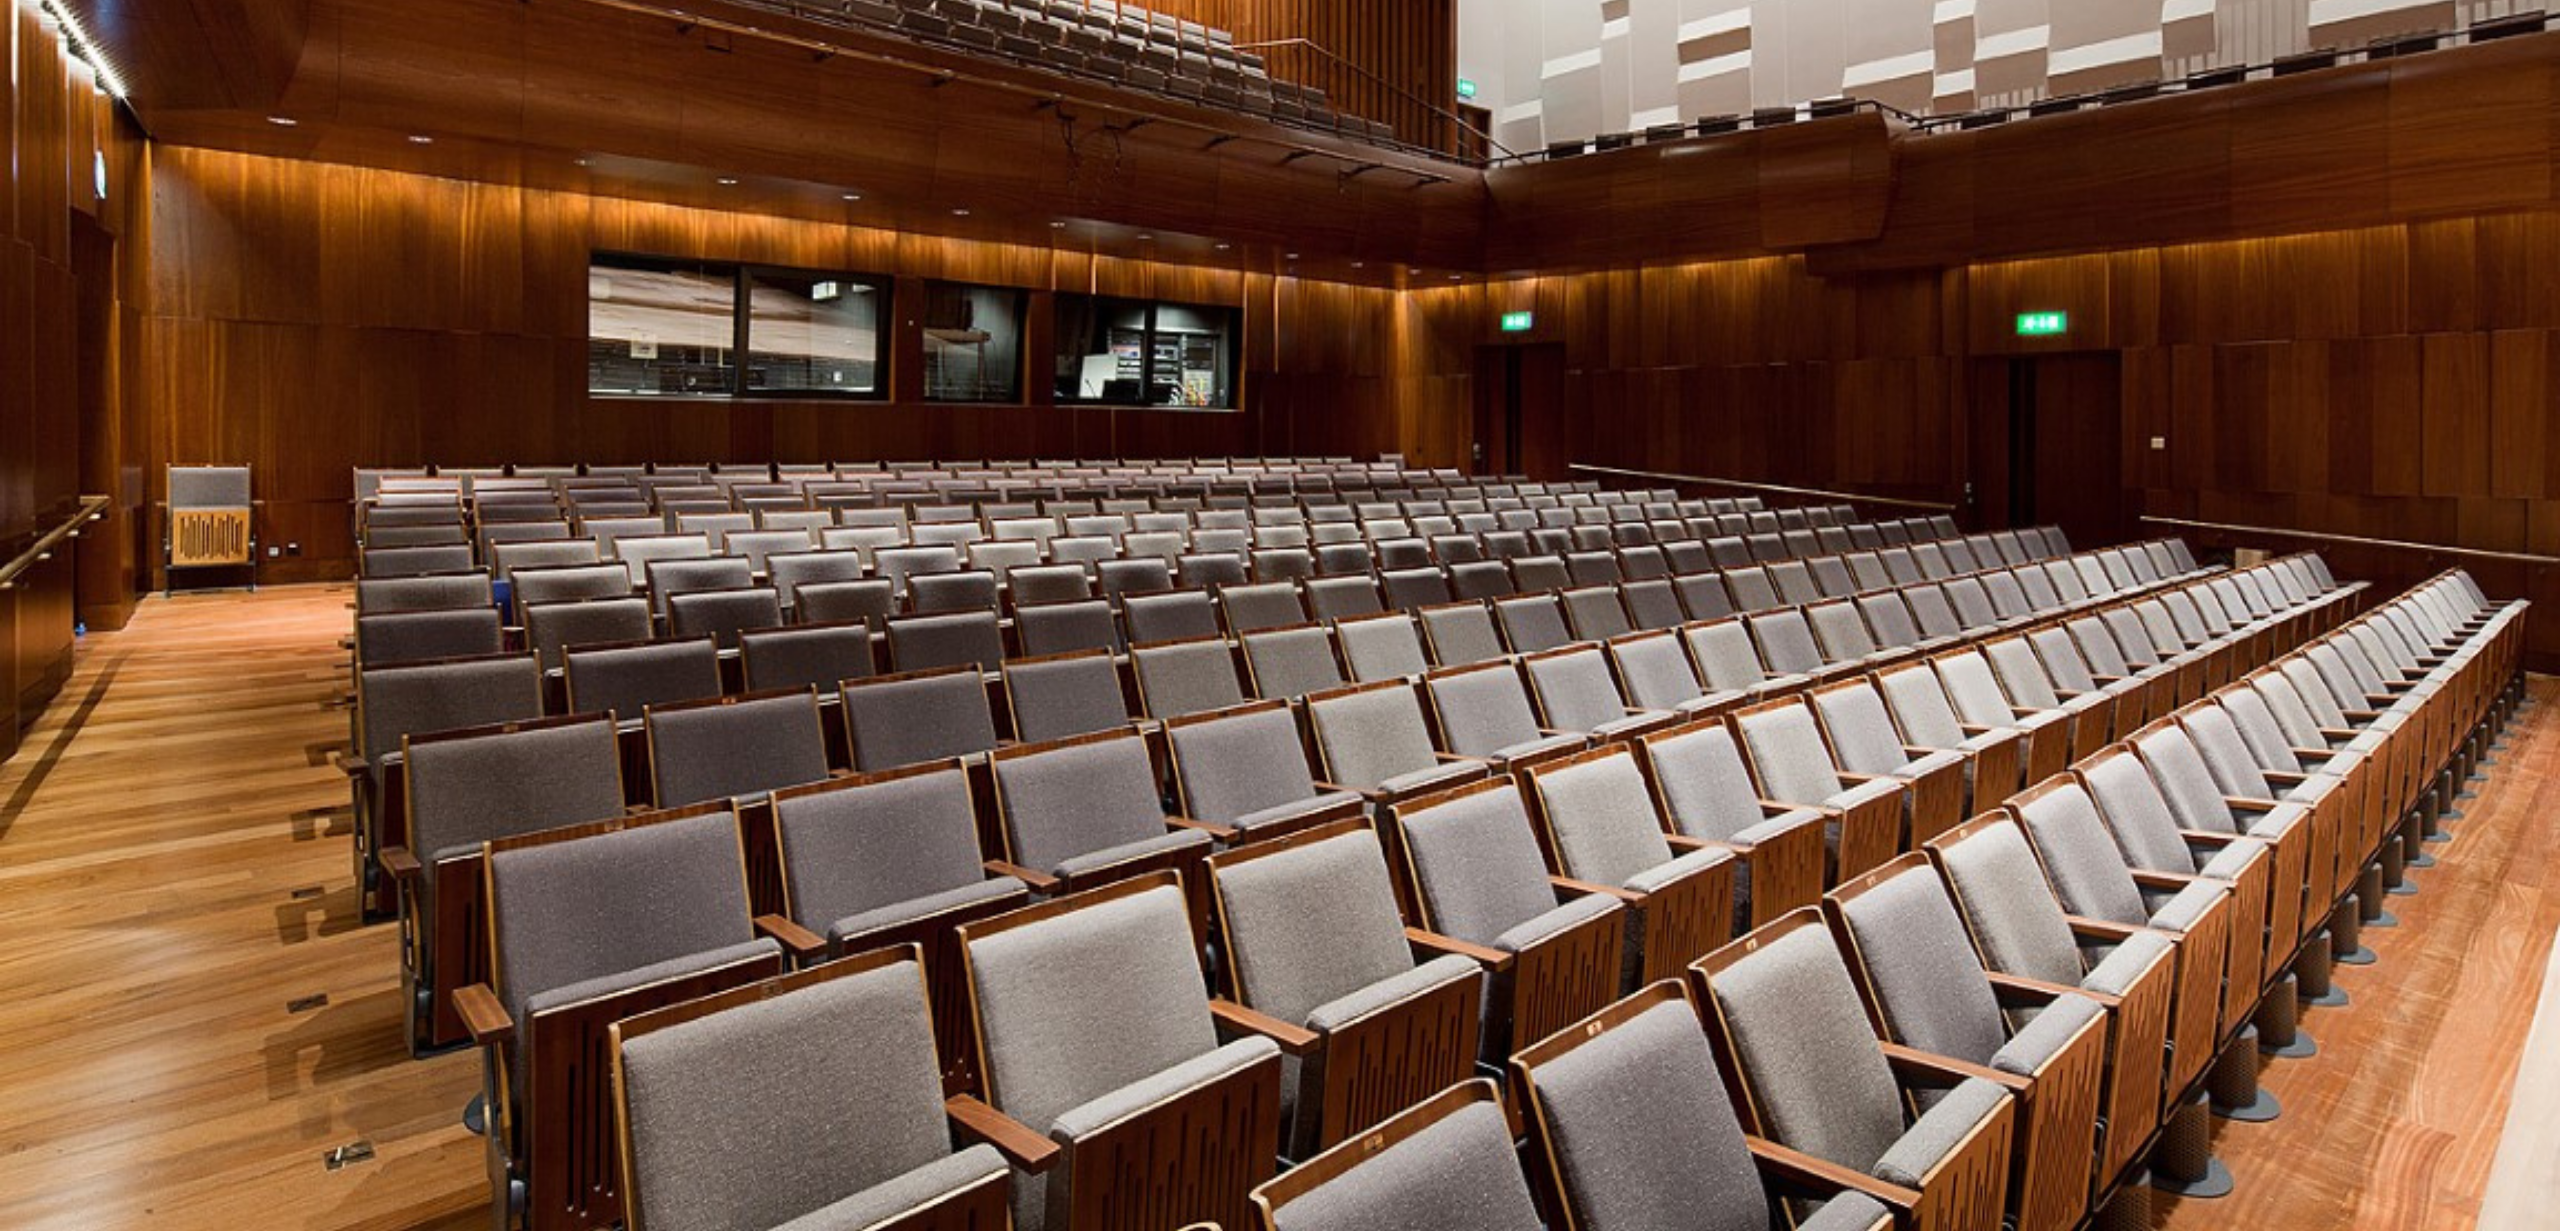 Seating at the Guildhall School of Music & Drama Concert Hall